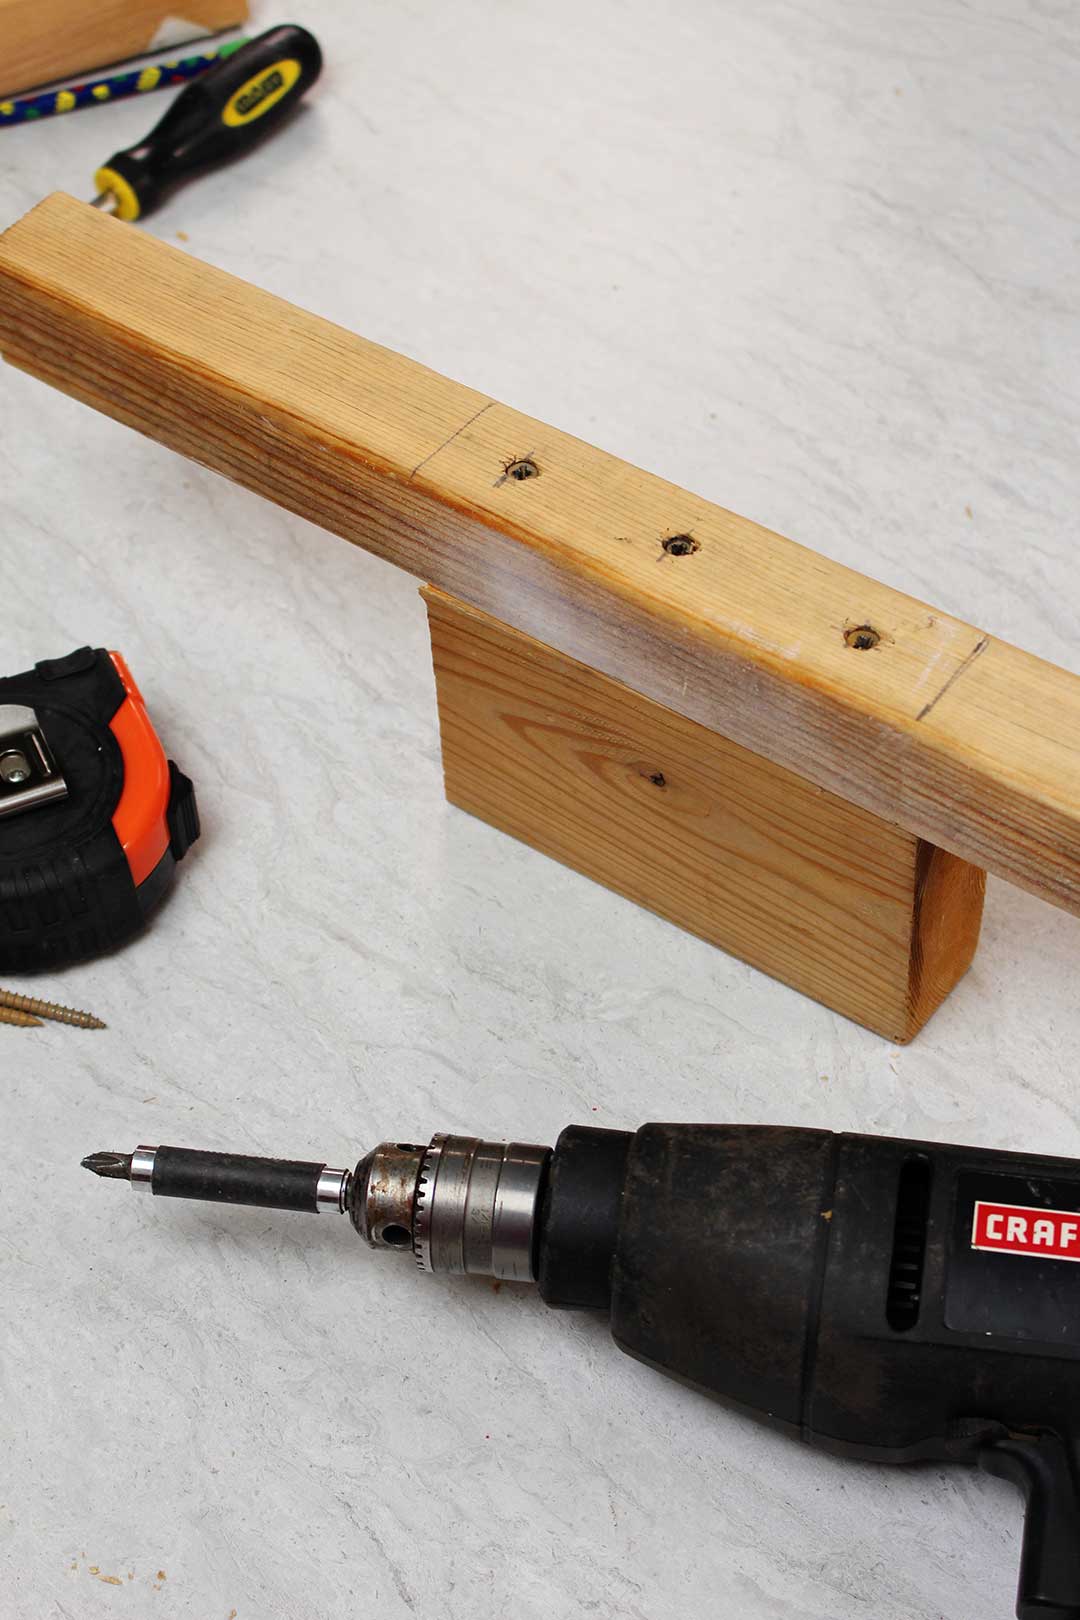 Close up image of drill, measuring tape and two pieces of wood screwed together for stilts.